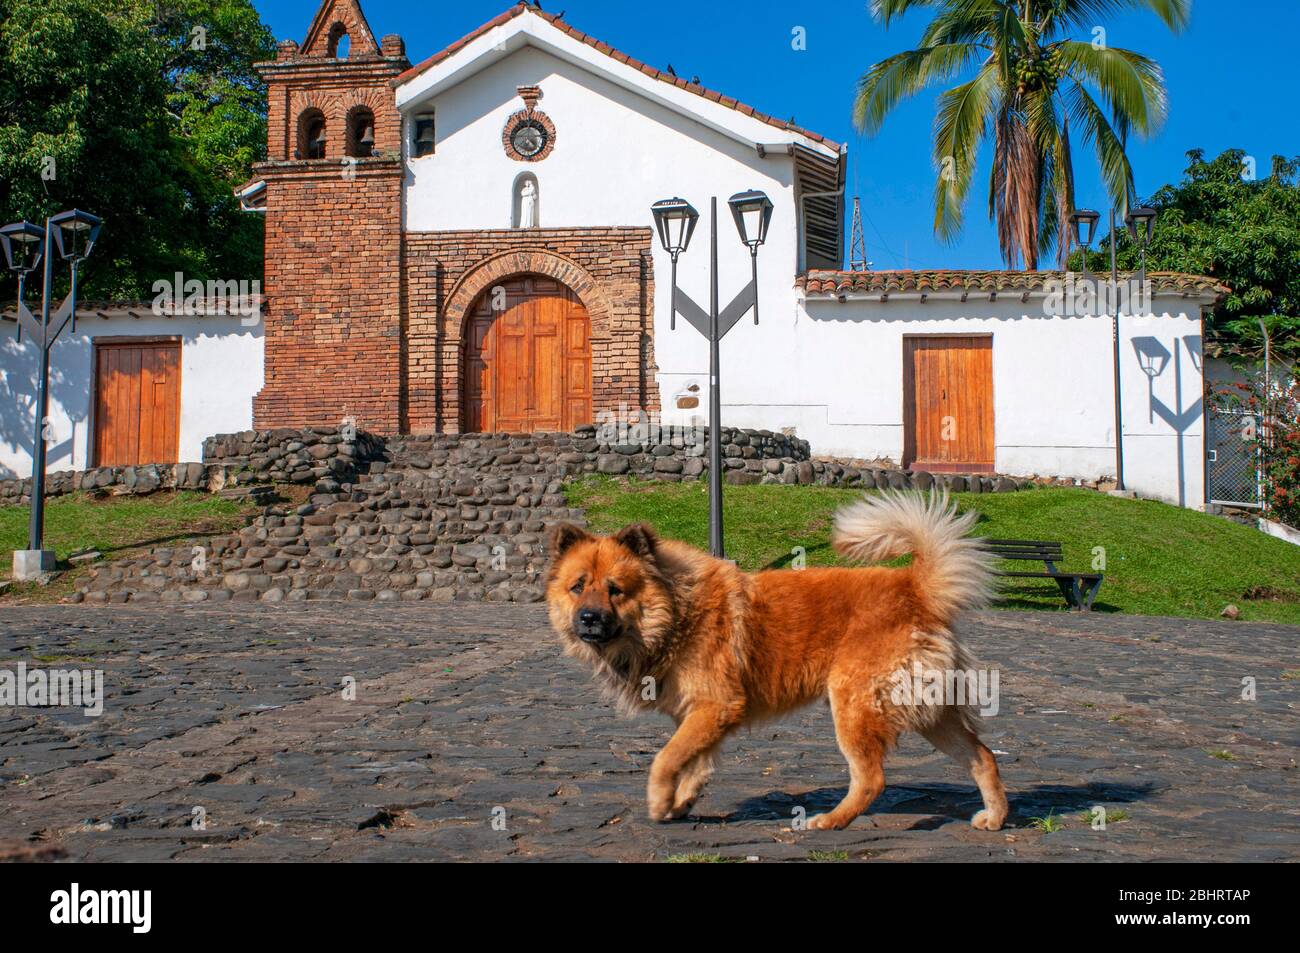 Dog in the San Antonio church or chapel in the neighbourhood of San Antonio of Cali in the Cauca Valley, Colombia, South America. Stock Photo